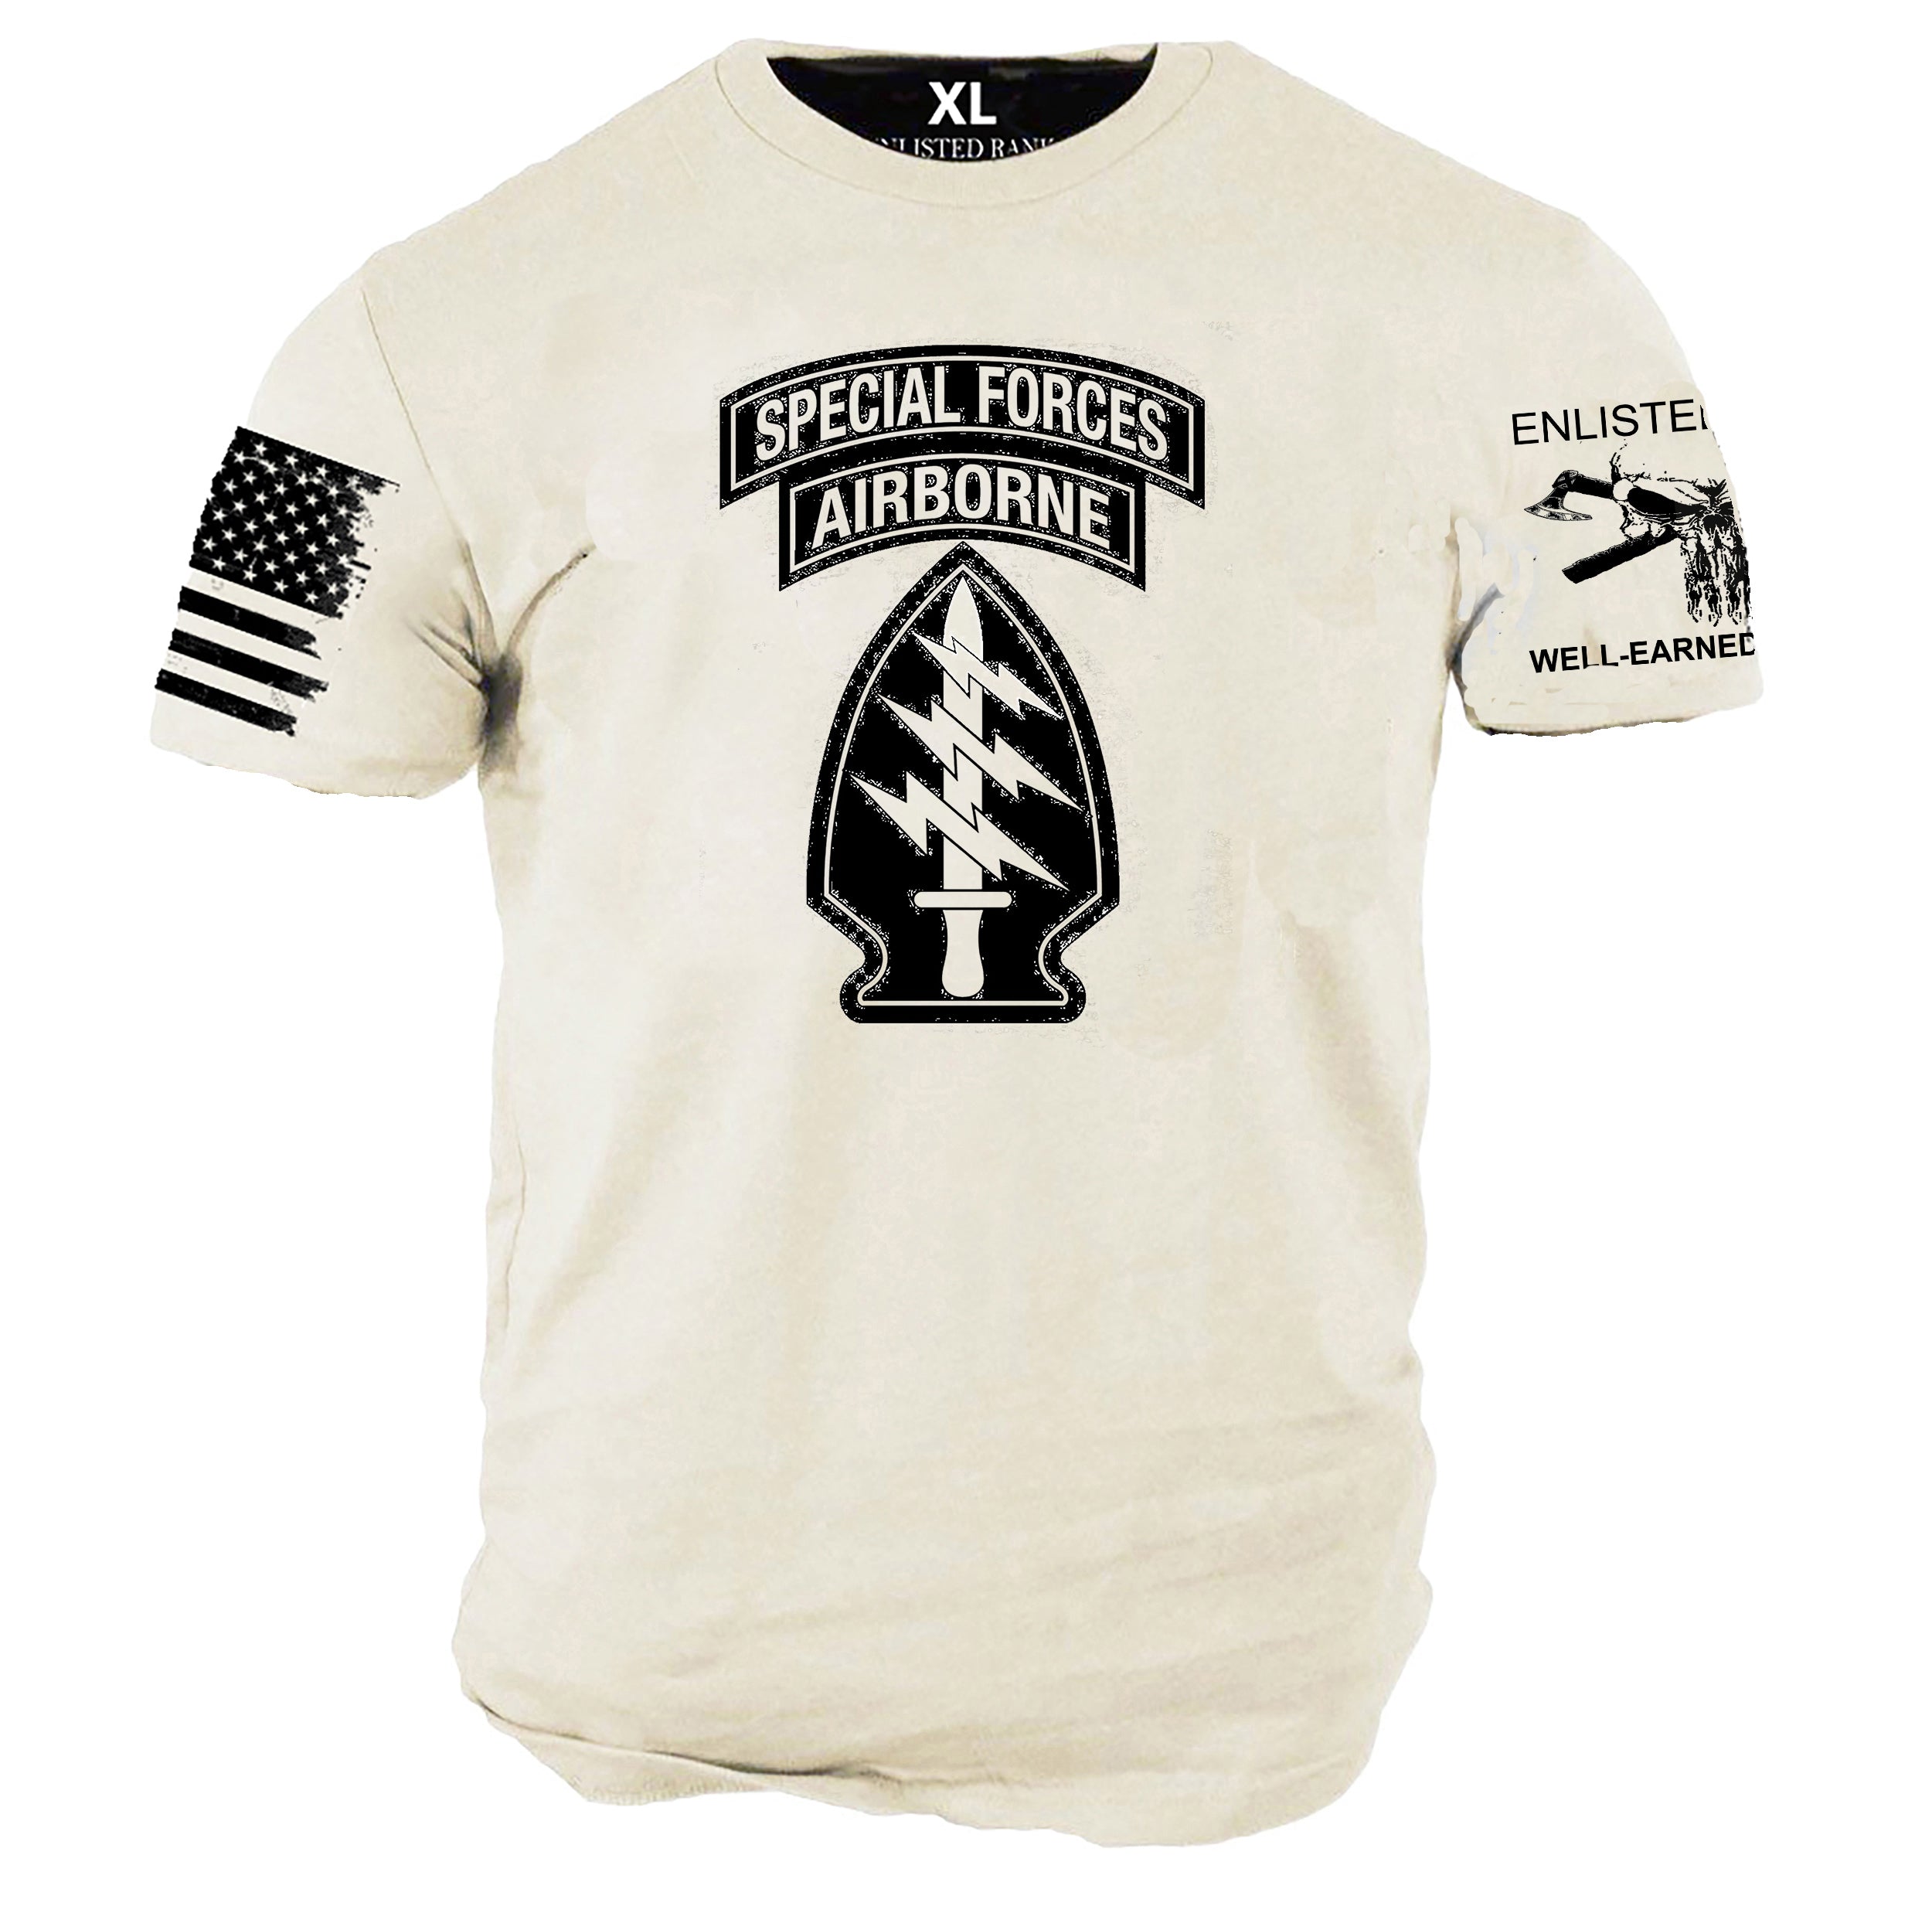 SPECIAL FORCES AIRBORNE, Enlisted Ranks graphic t-shirt